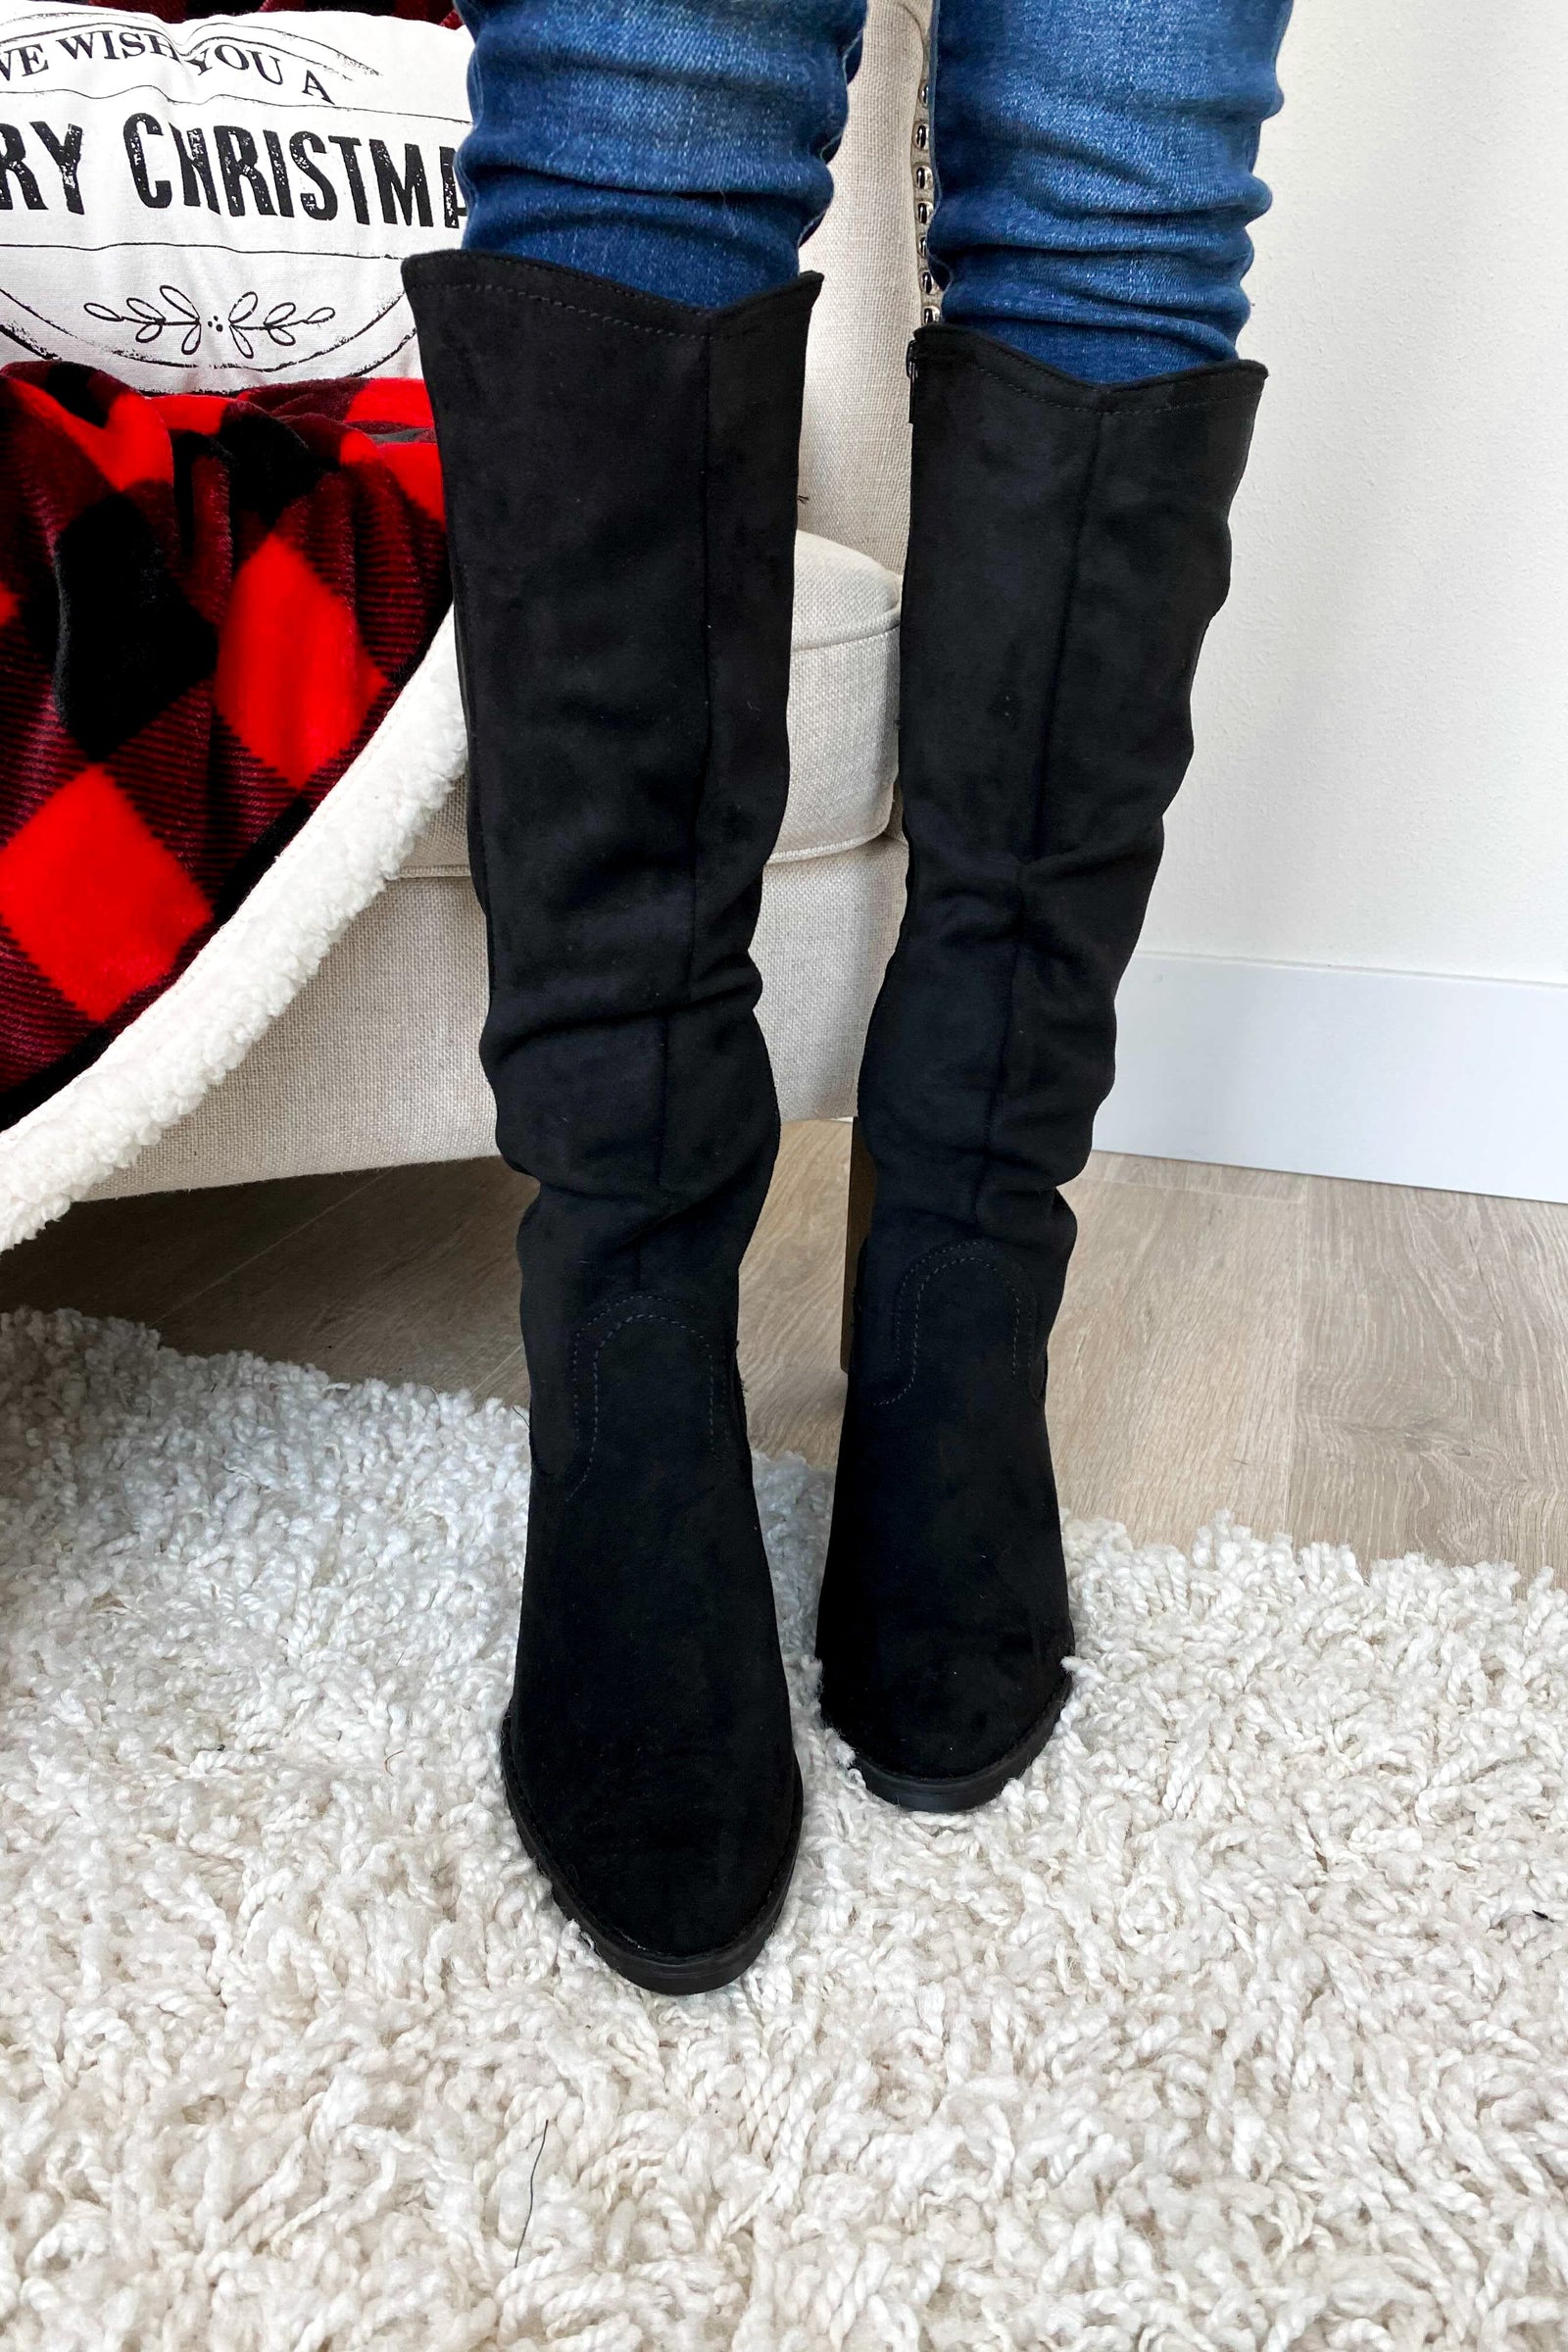 very black boots